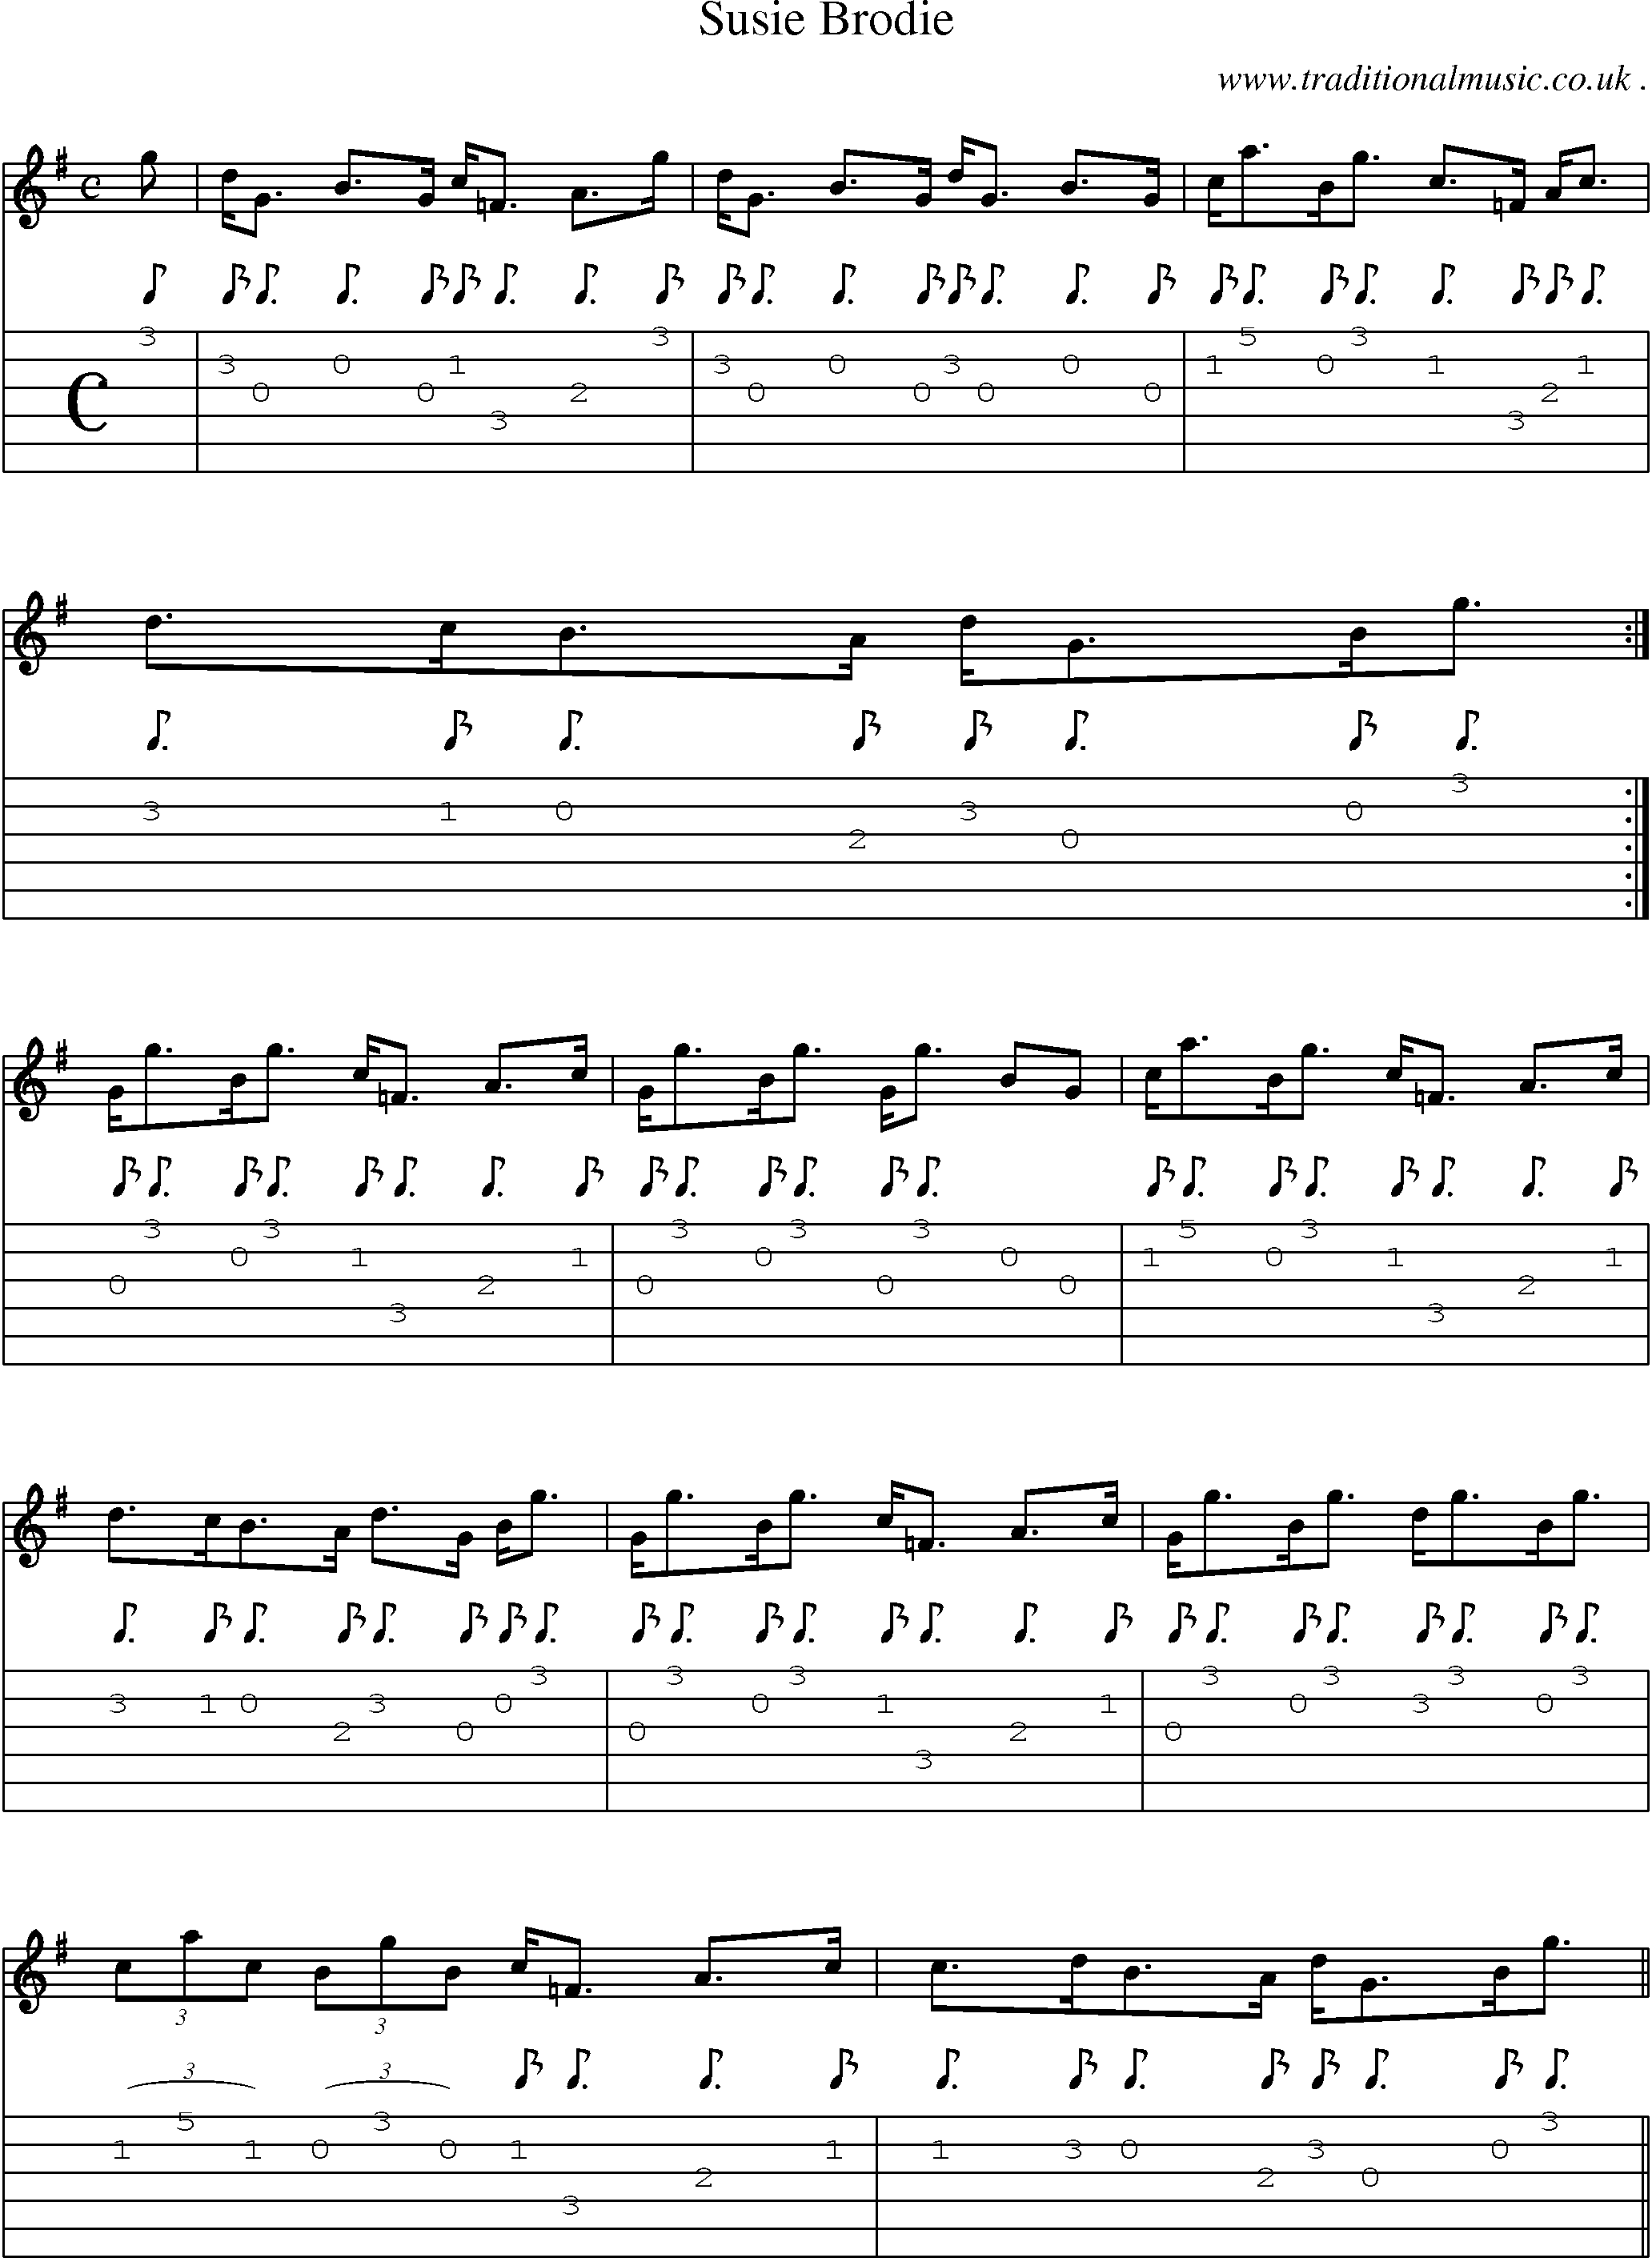 Sheet-music  score, Chords and Guitar Tabs for Susie Brodie